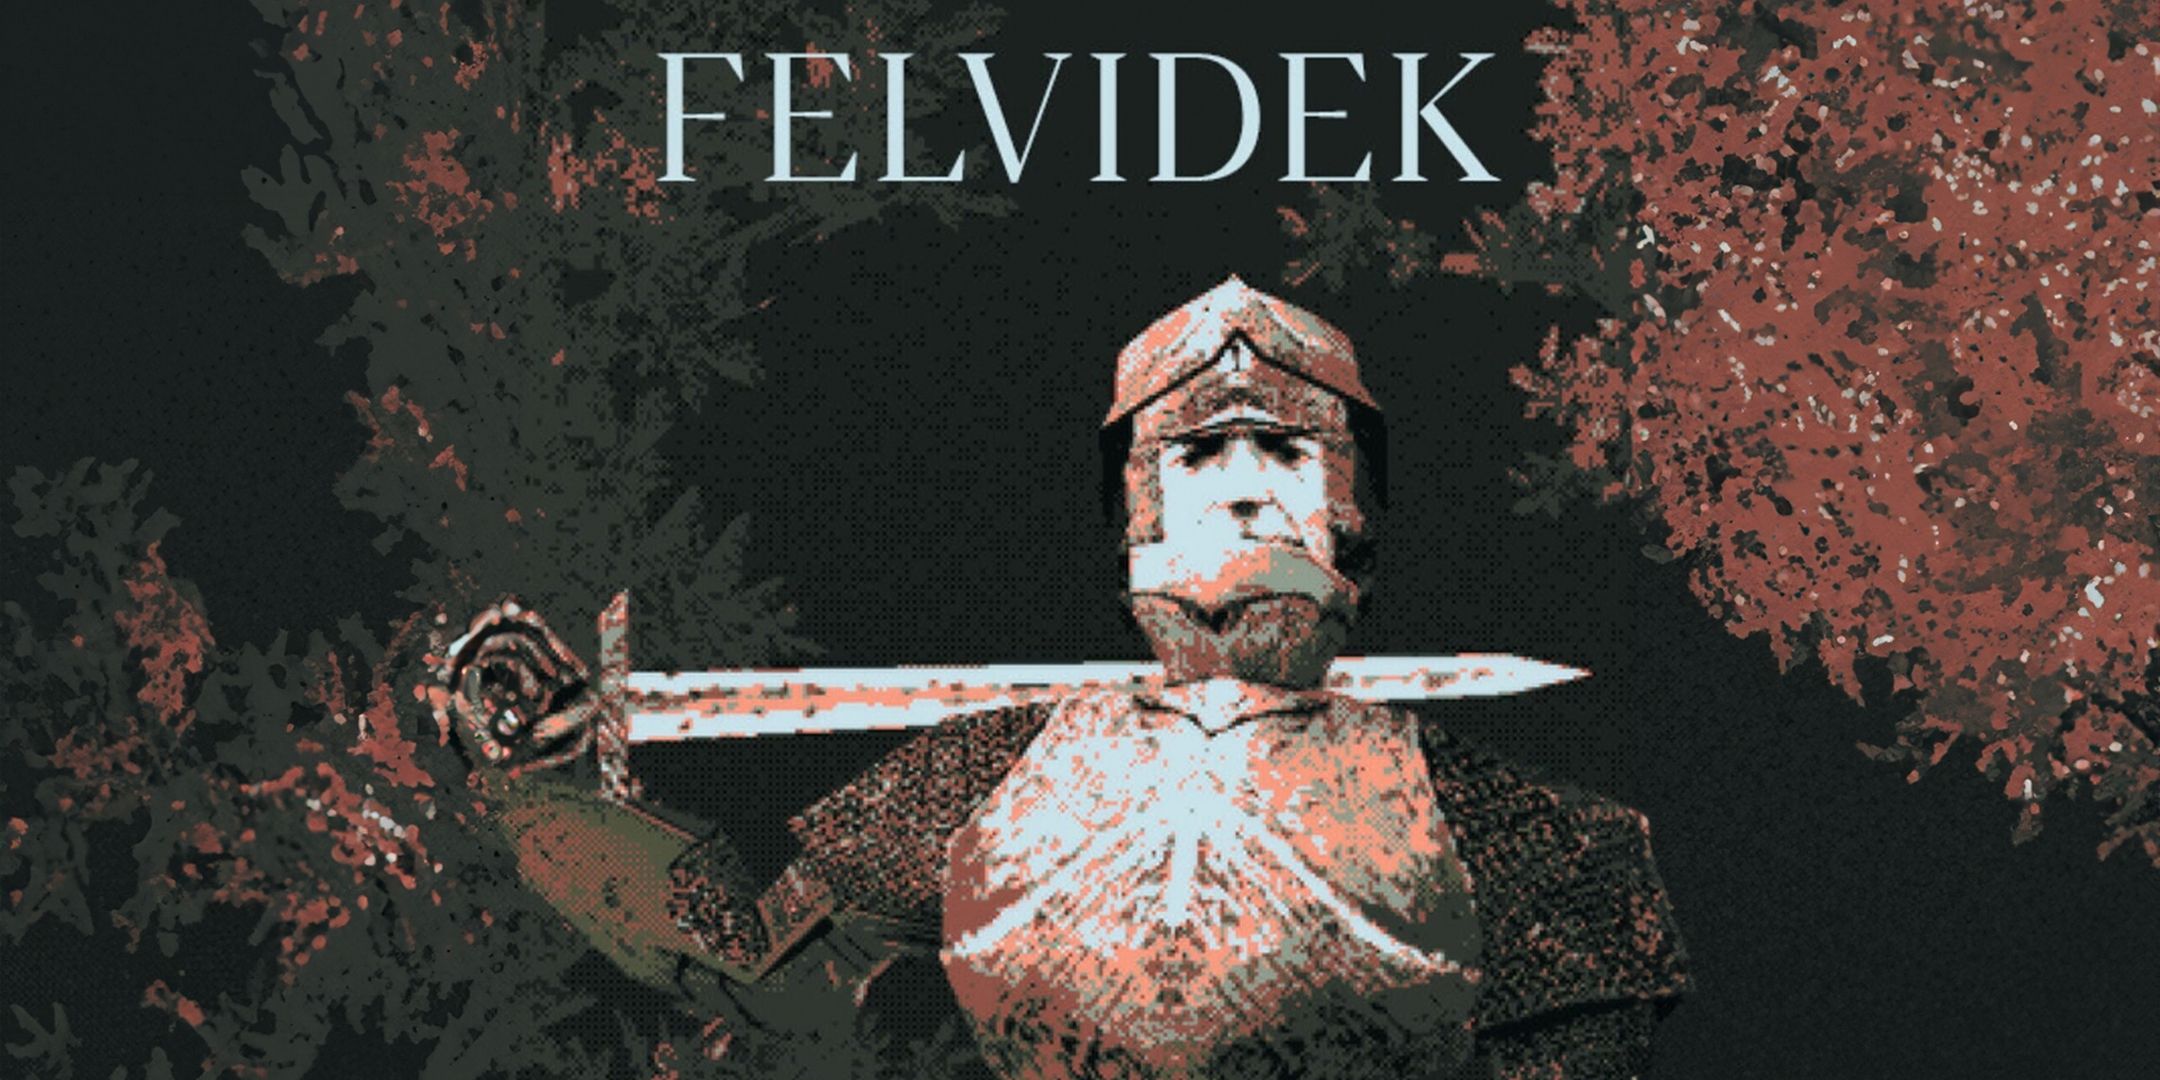 A knight with his sword held behind his head underneath the title Felvidek.